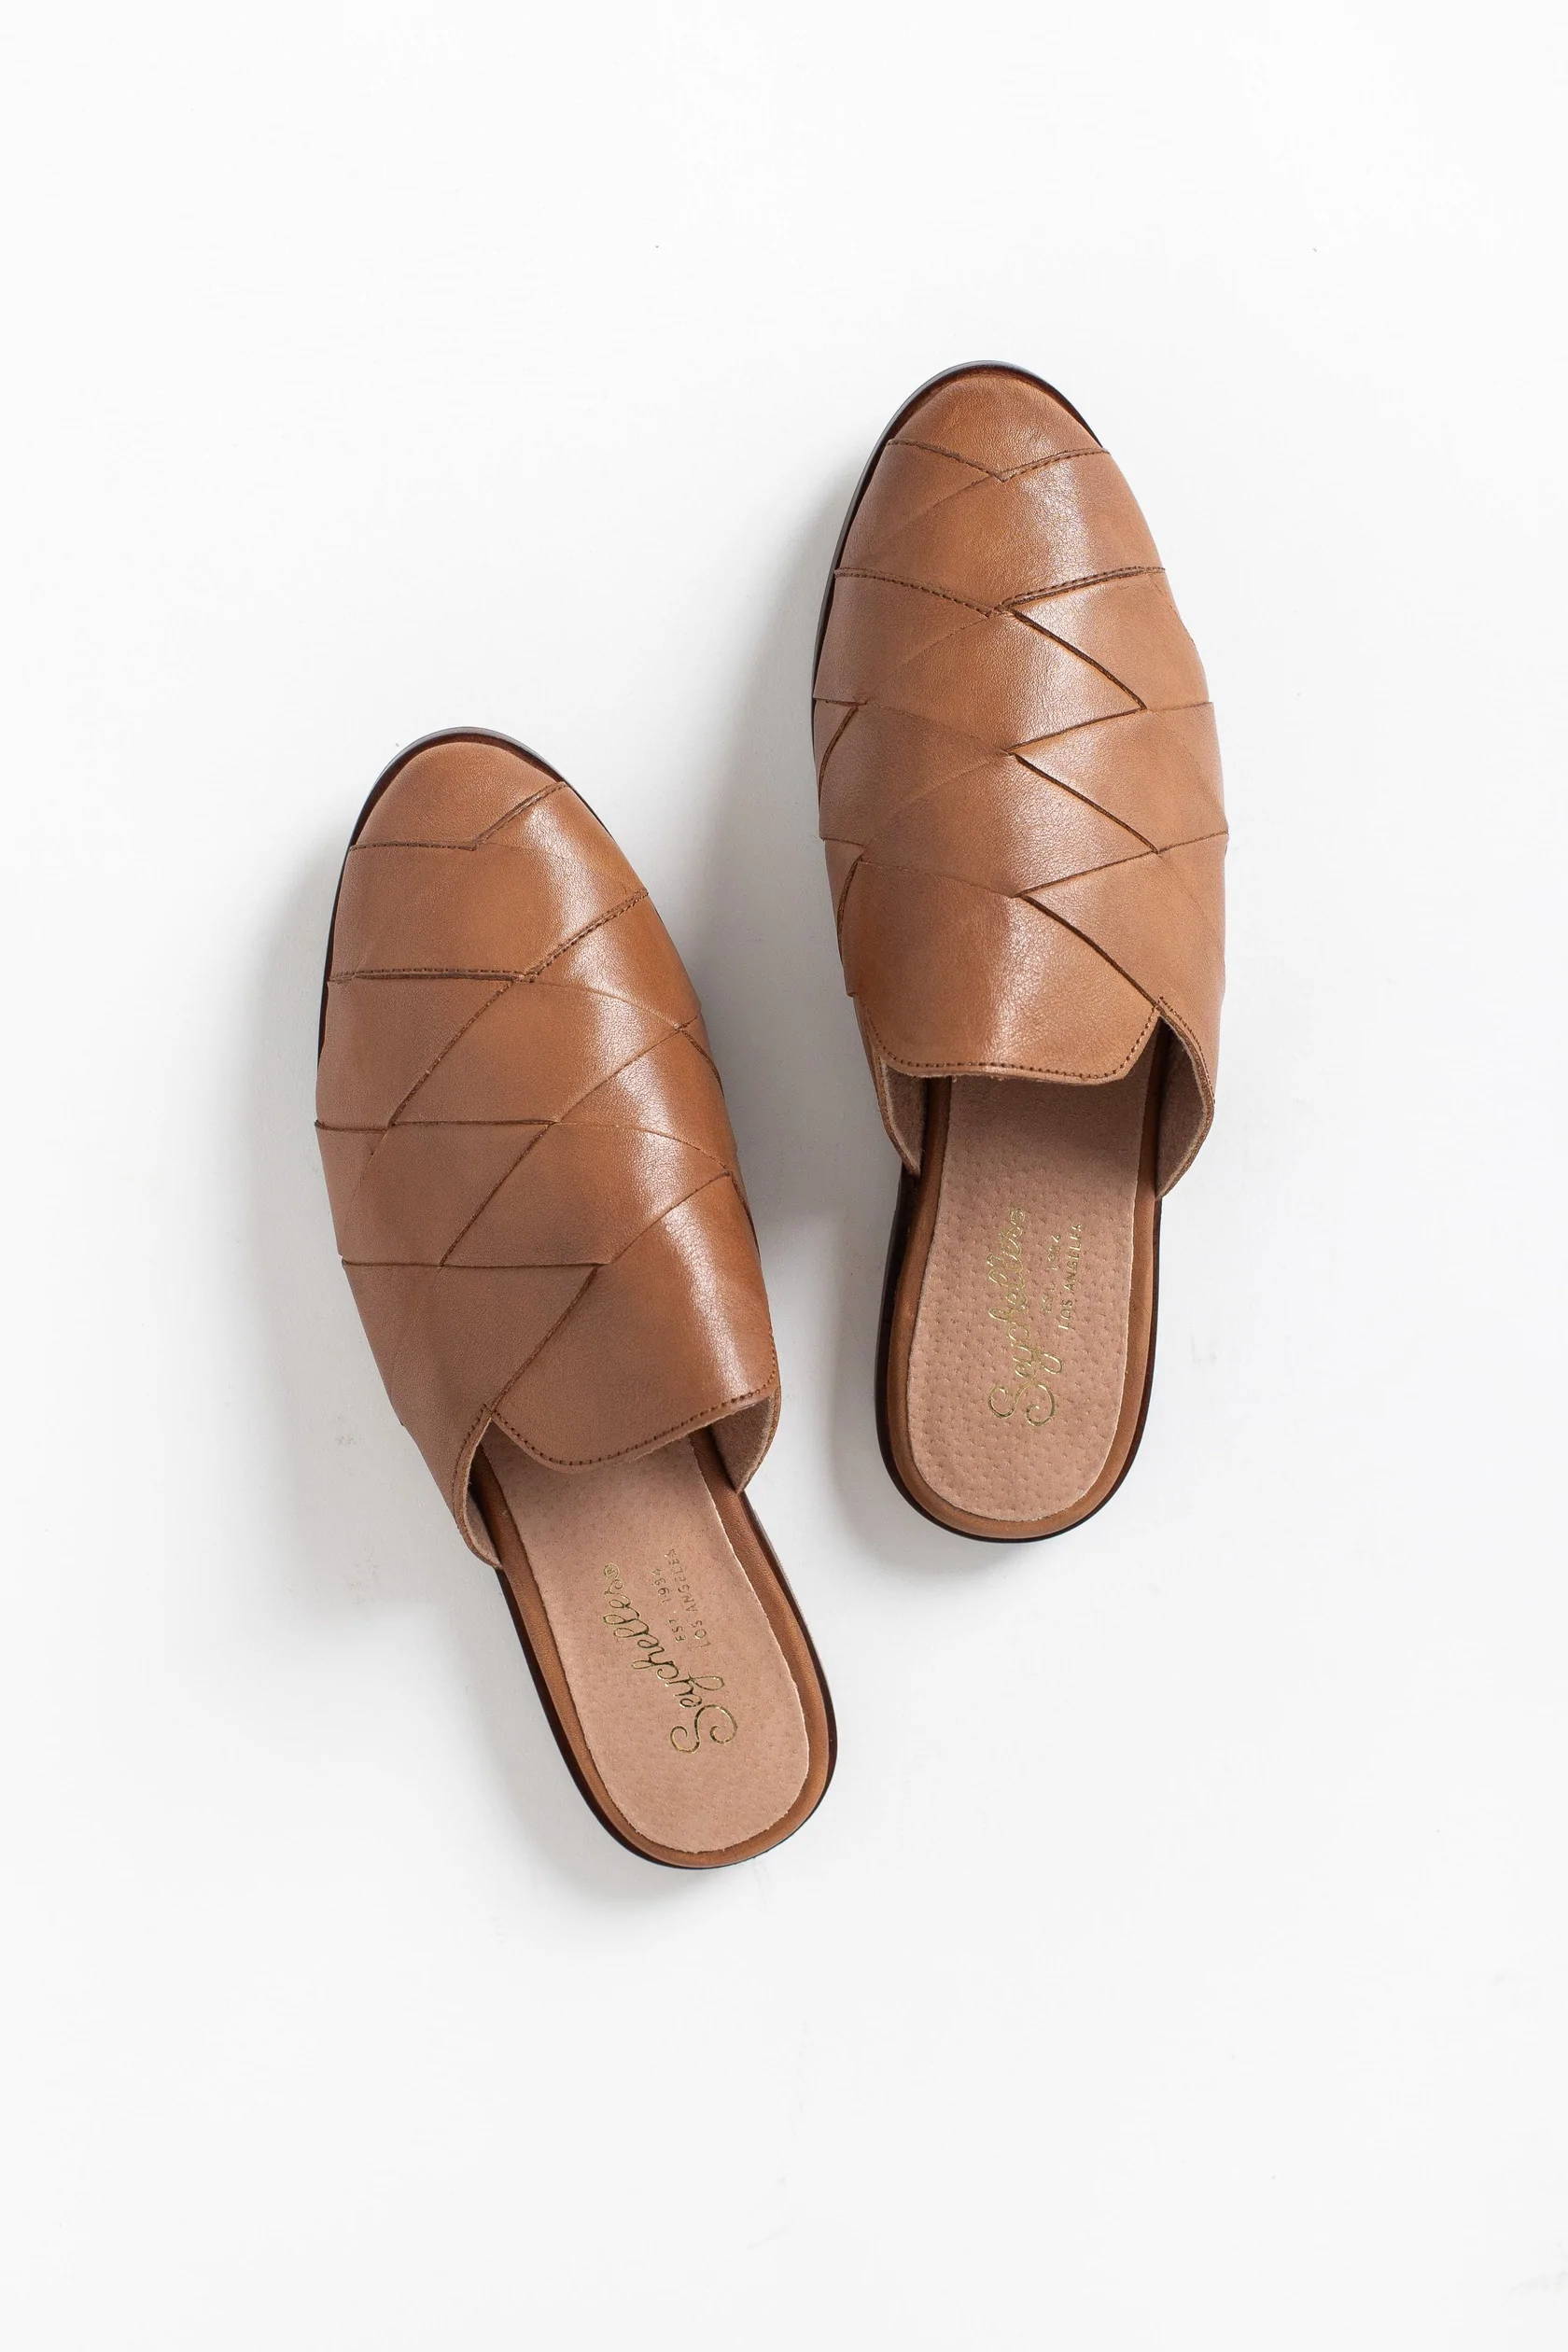 A pair of brown leather slip-on flats